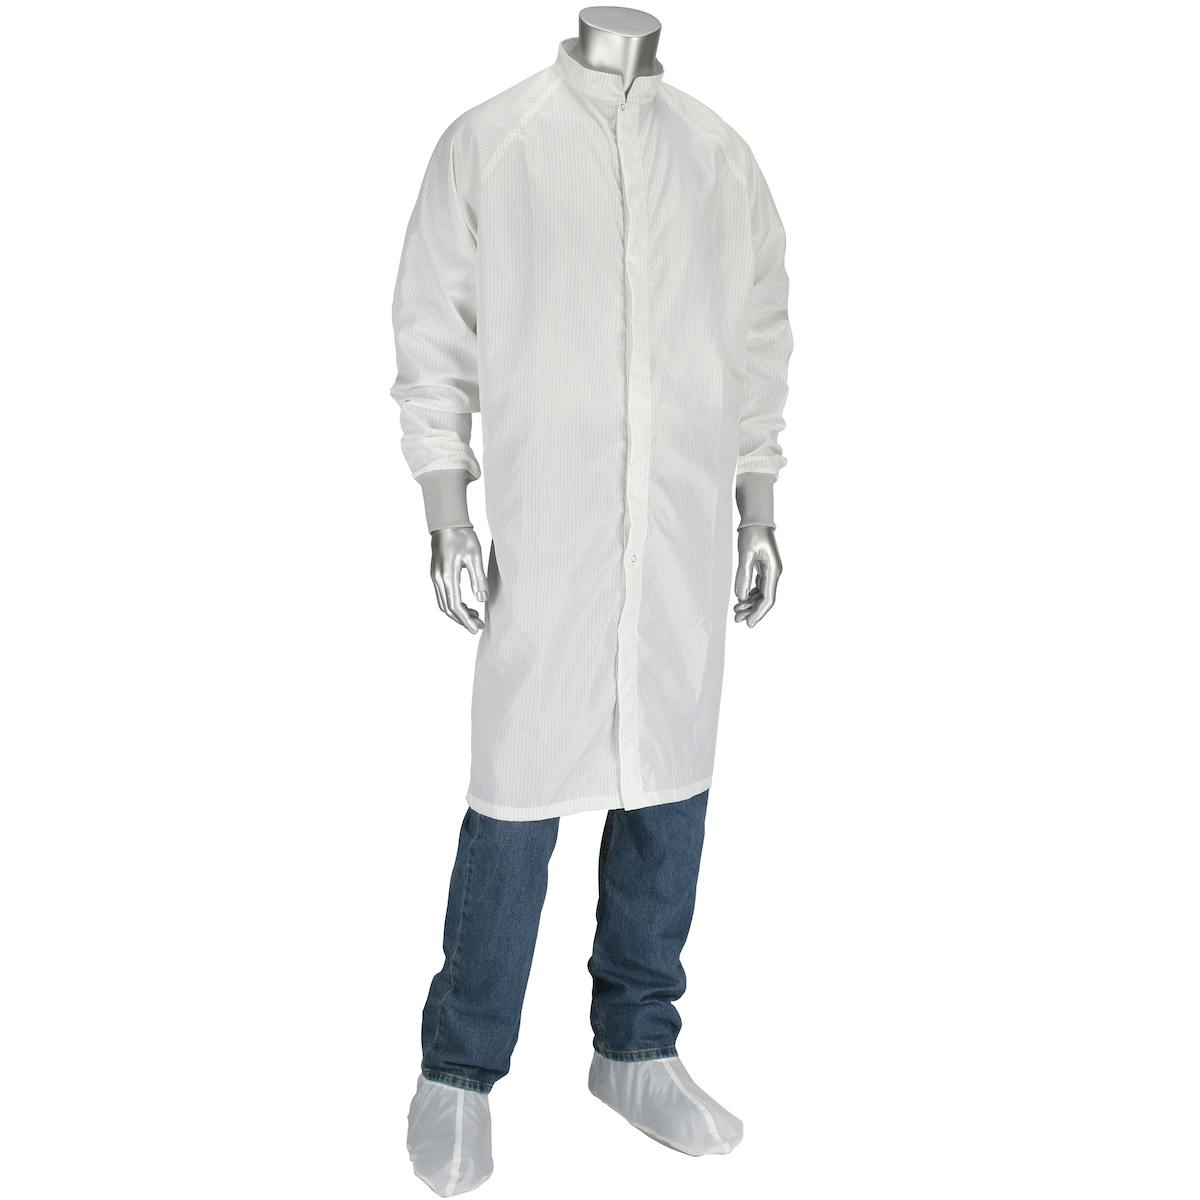 Ultimax Stripe ISO 3 (Class 1) Cleanroom Frock, White (CFRZC-16WH-5PK)